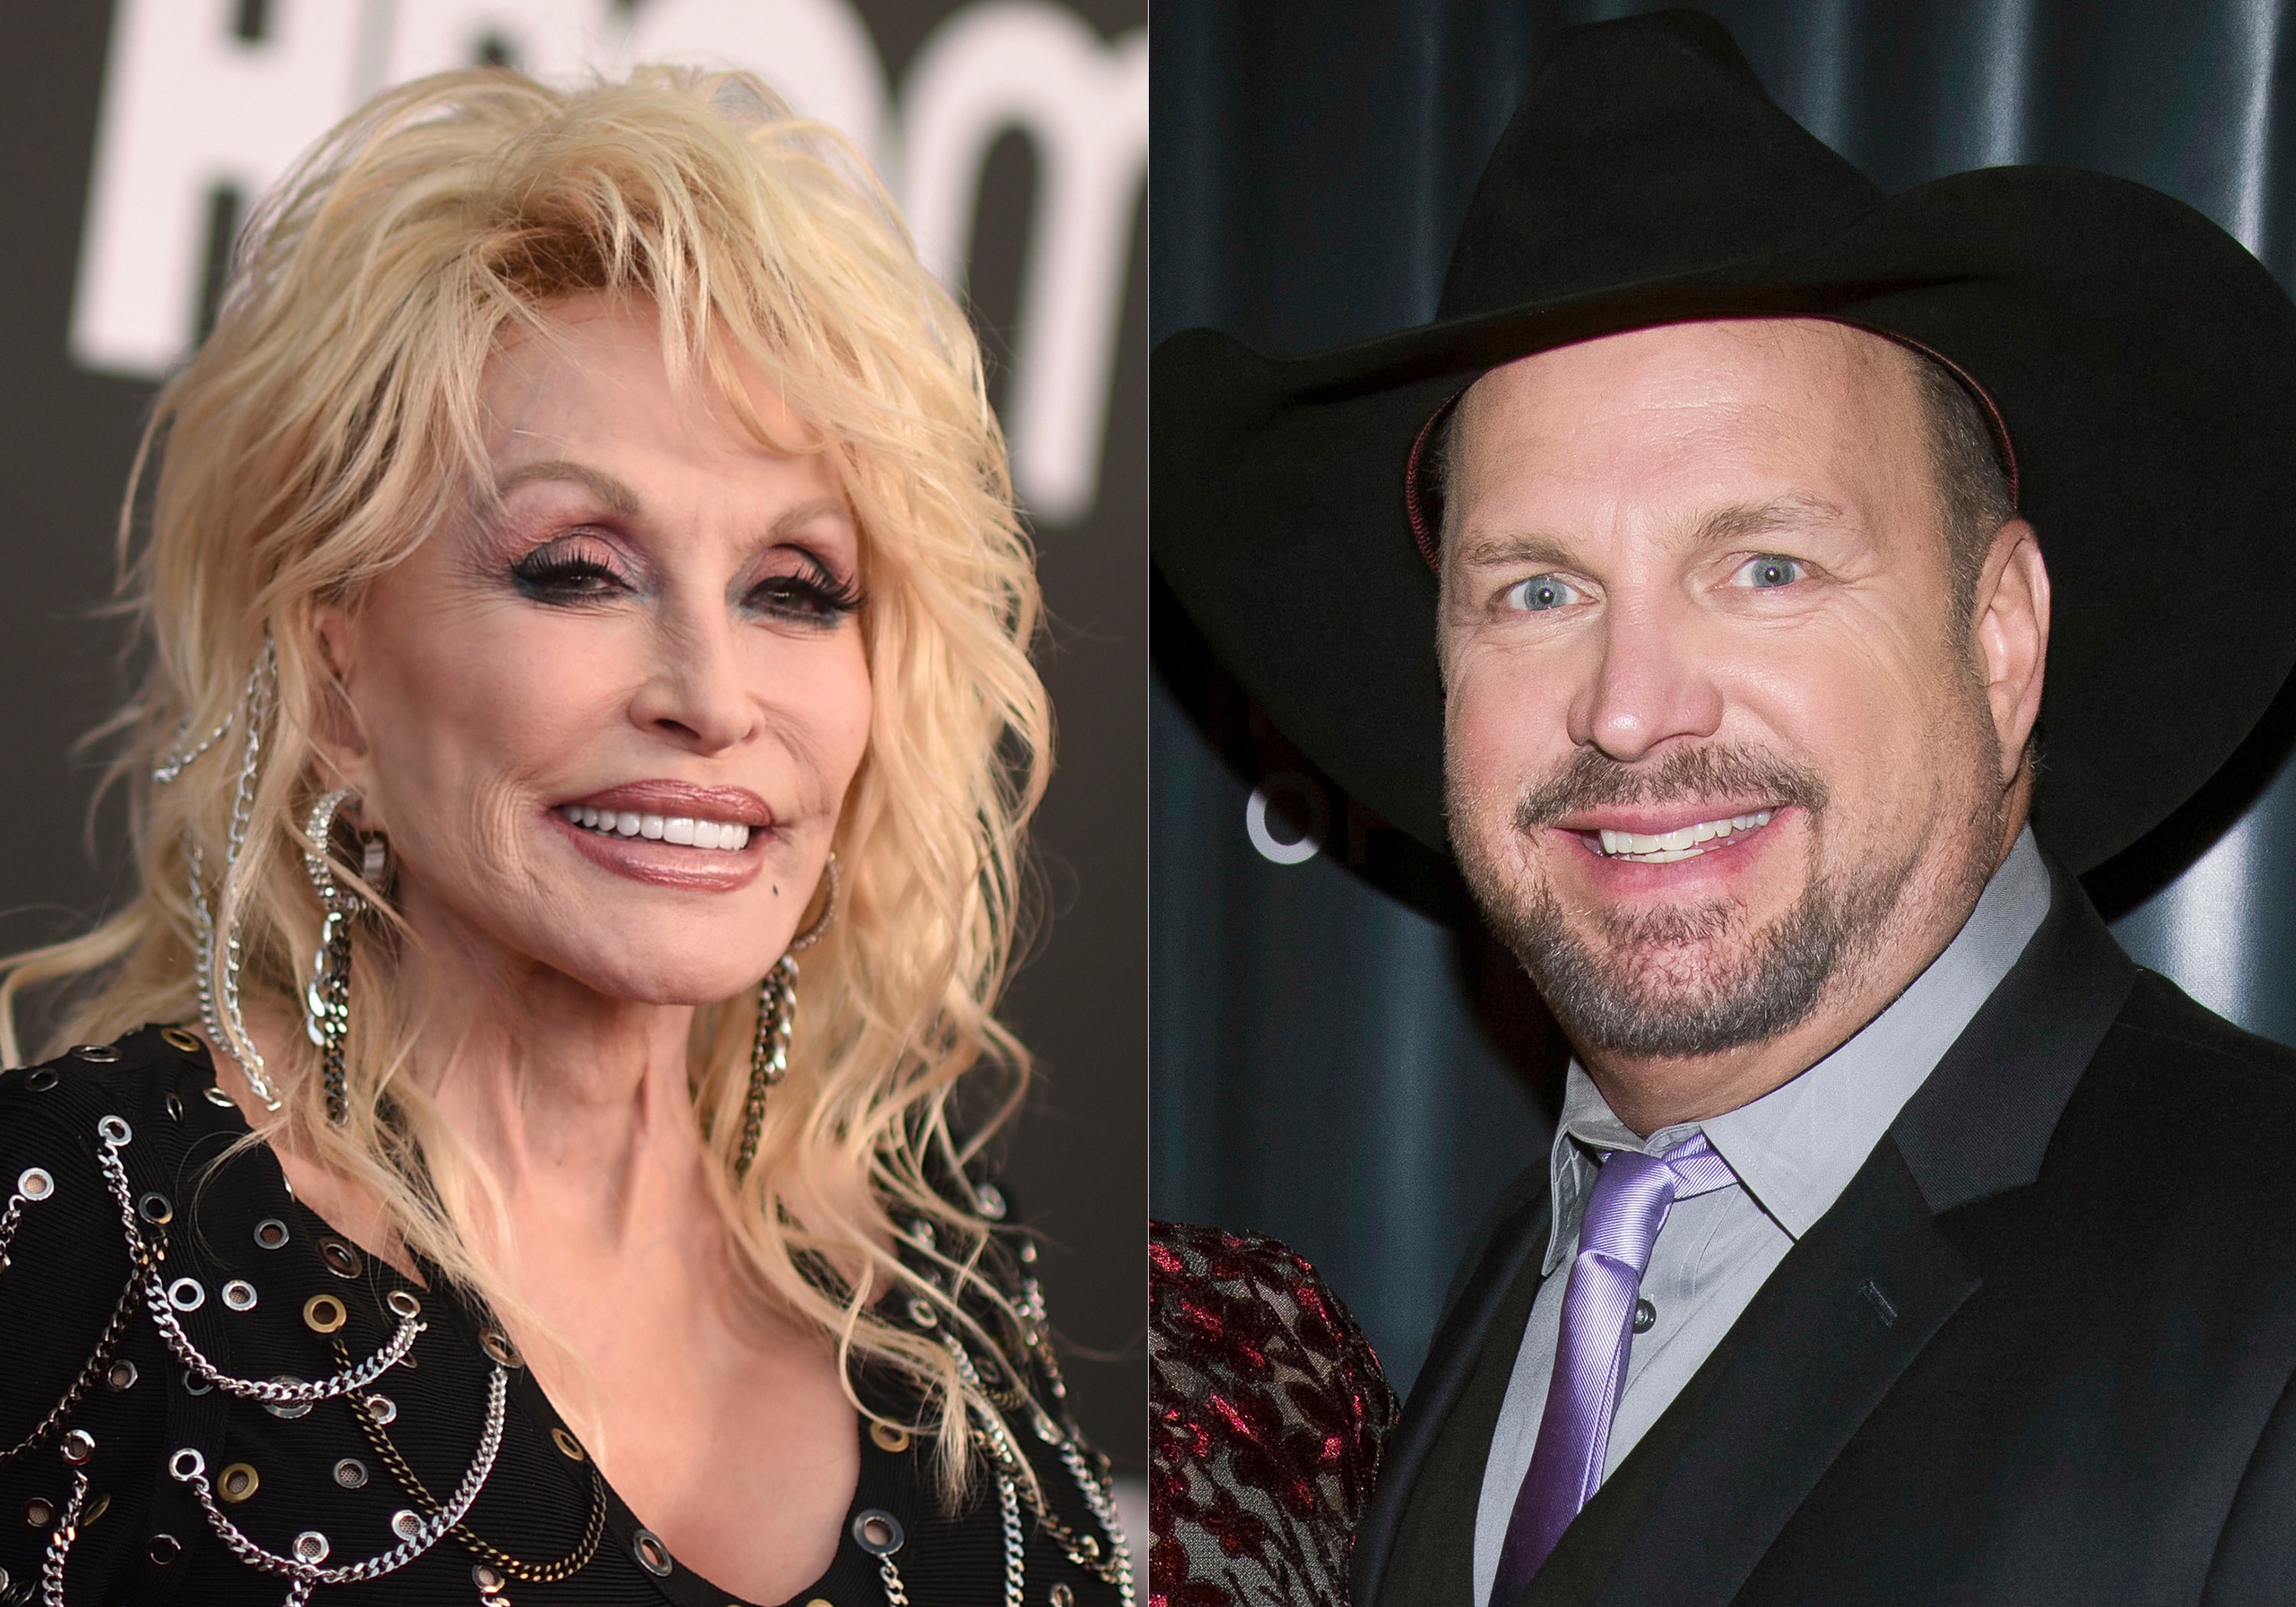 Academy of Country Music Awards ready to party with Dolly Parton, Garth